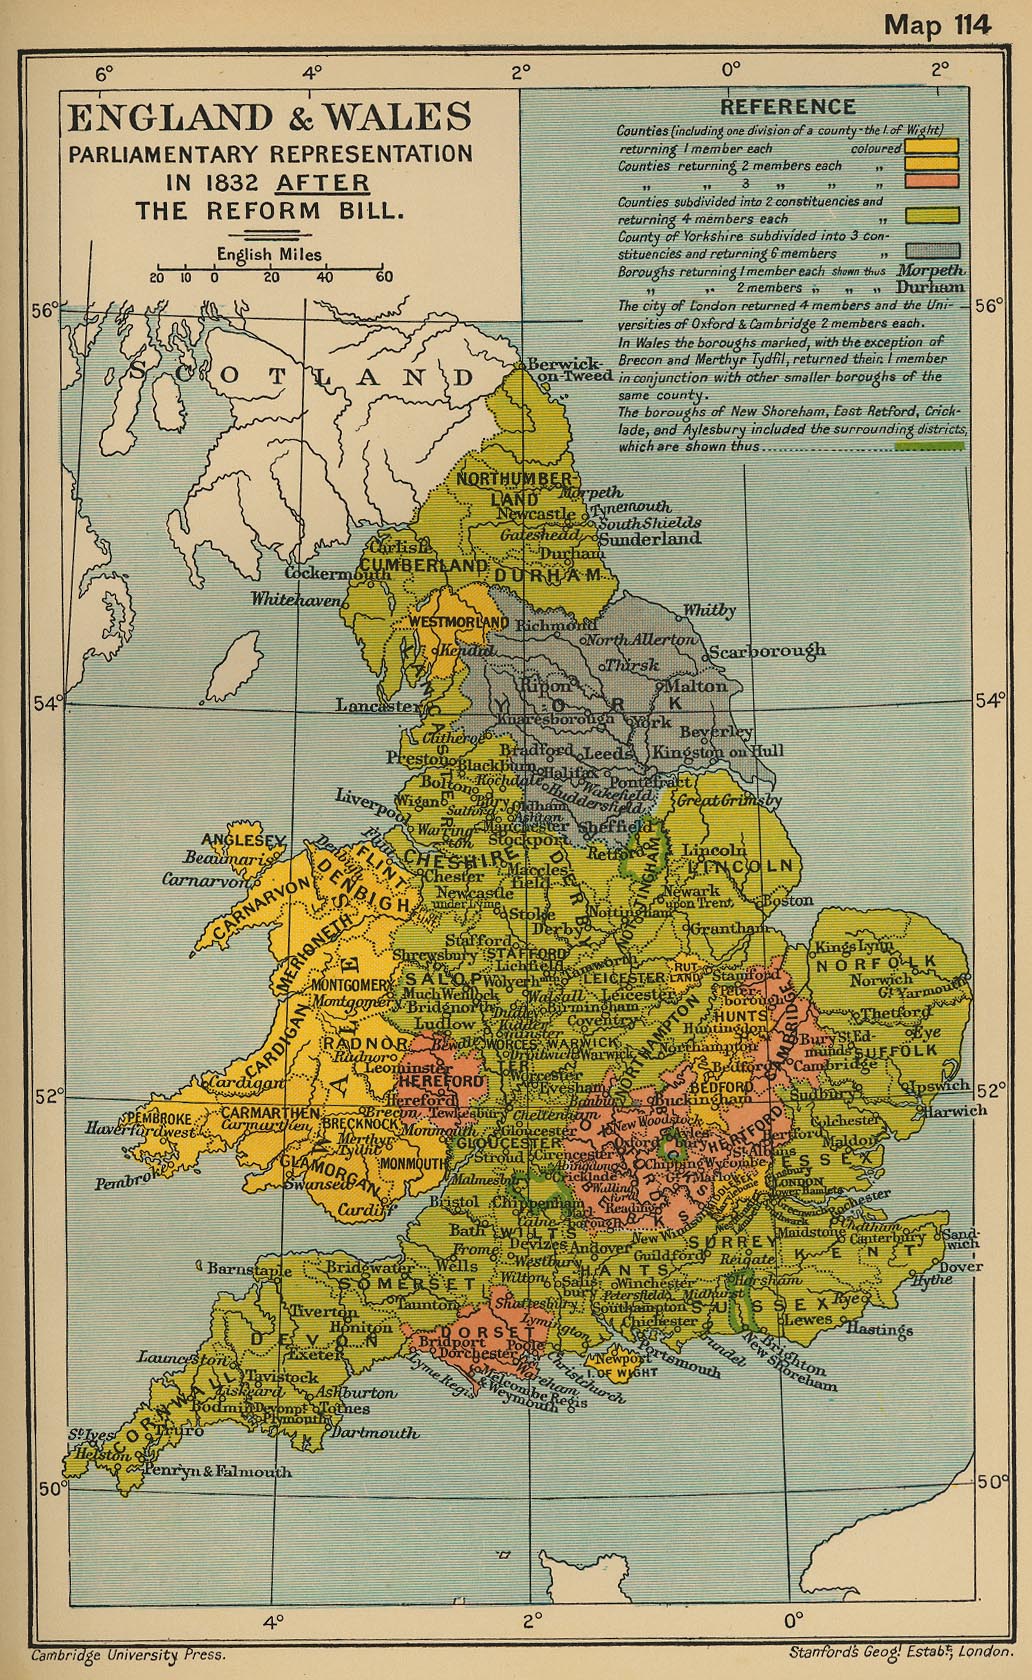 Map of England and Wales: Parliamentary Representation in 1832 after the Reform Bill